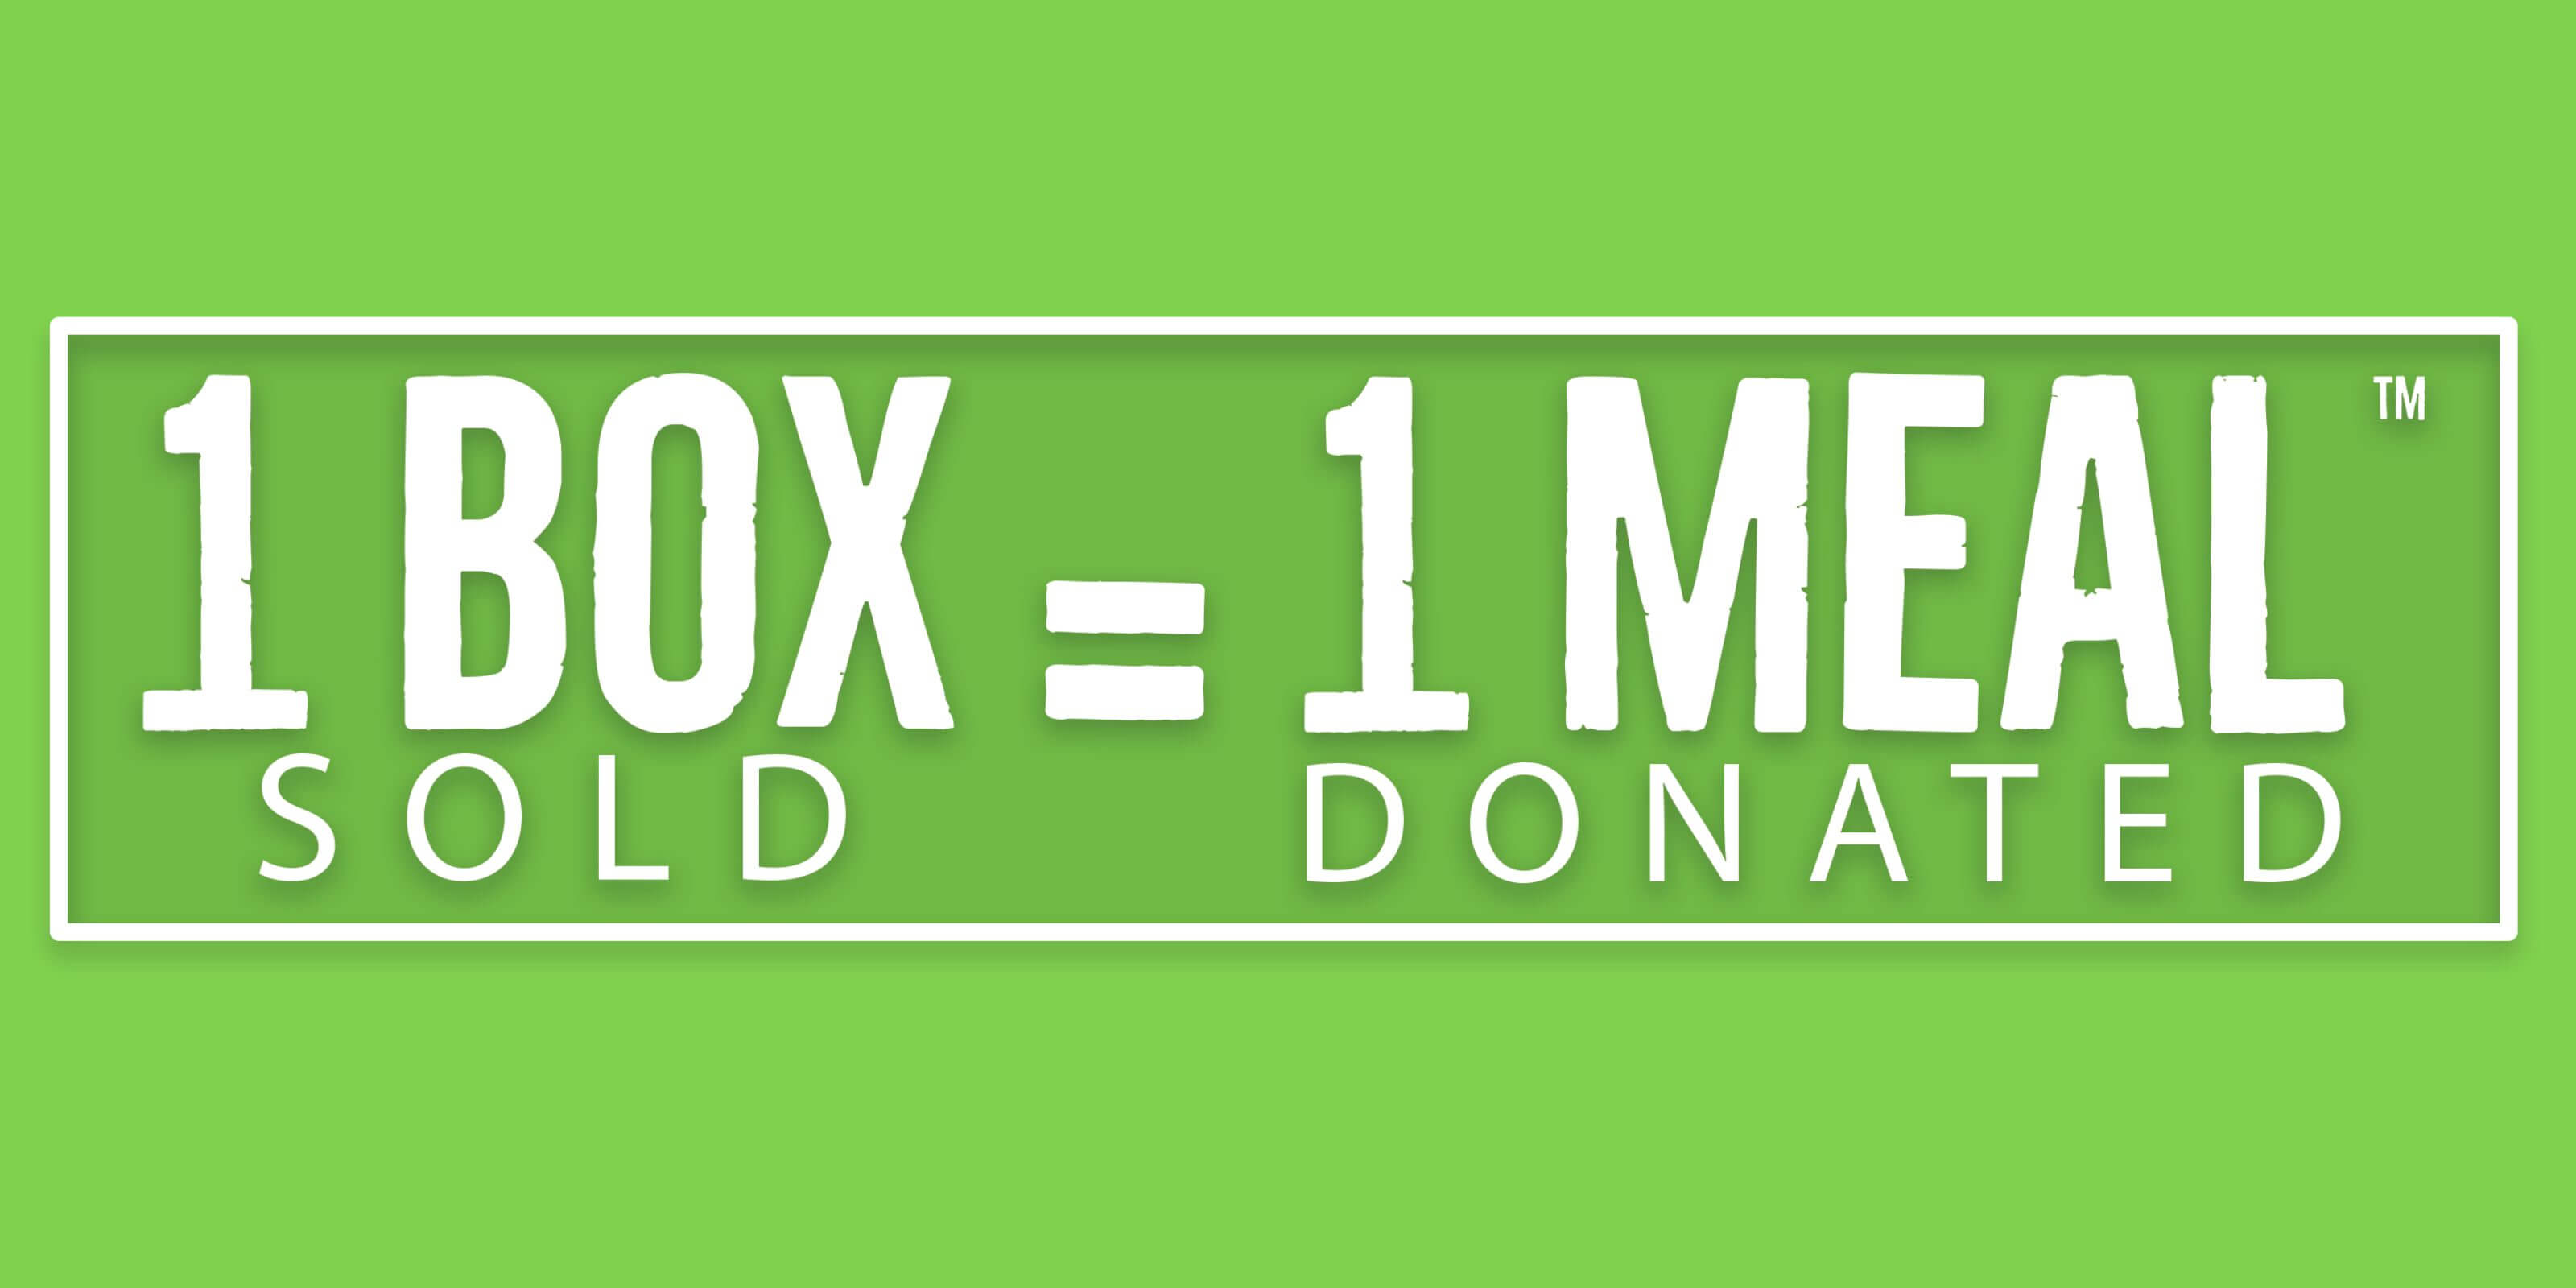 1 Box Sold = 1 Meal Donated